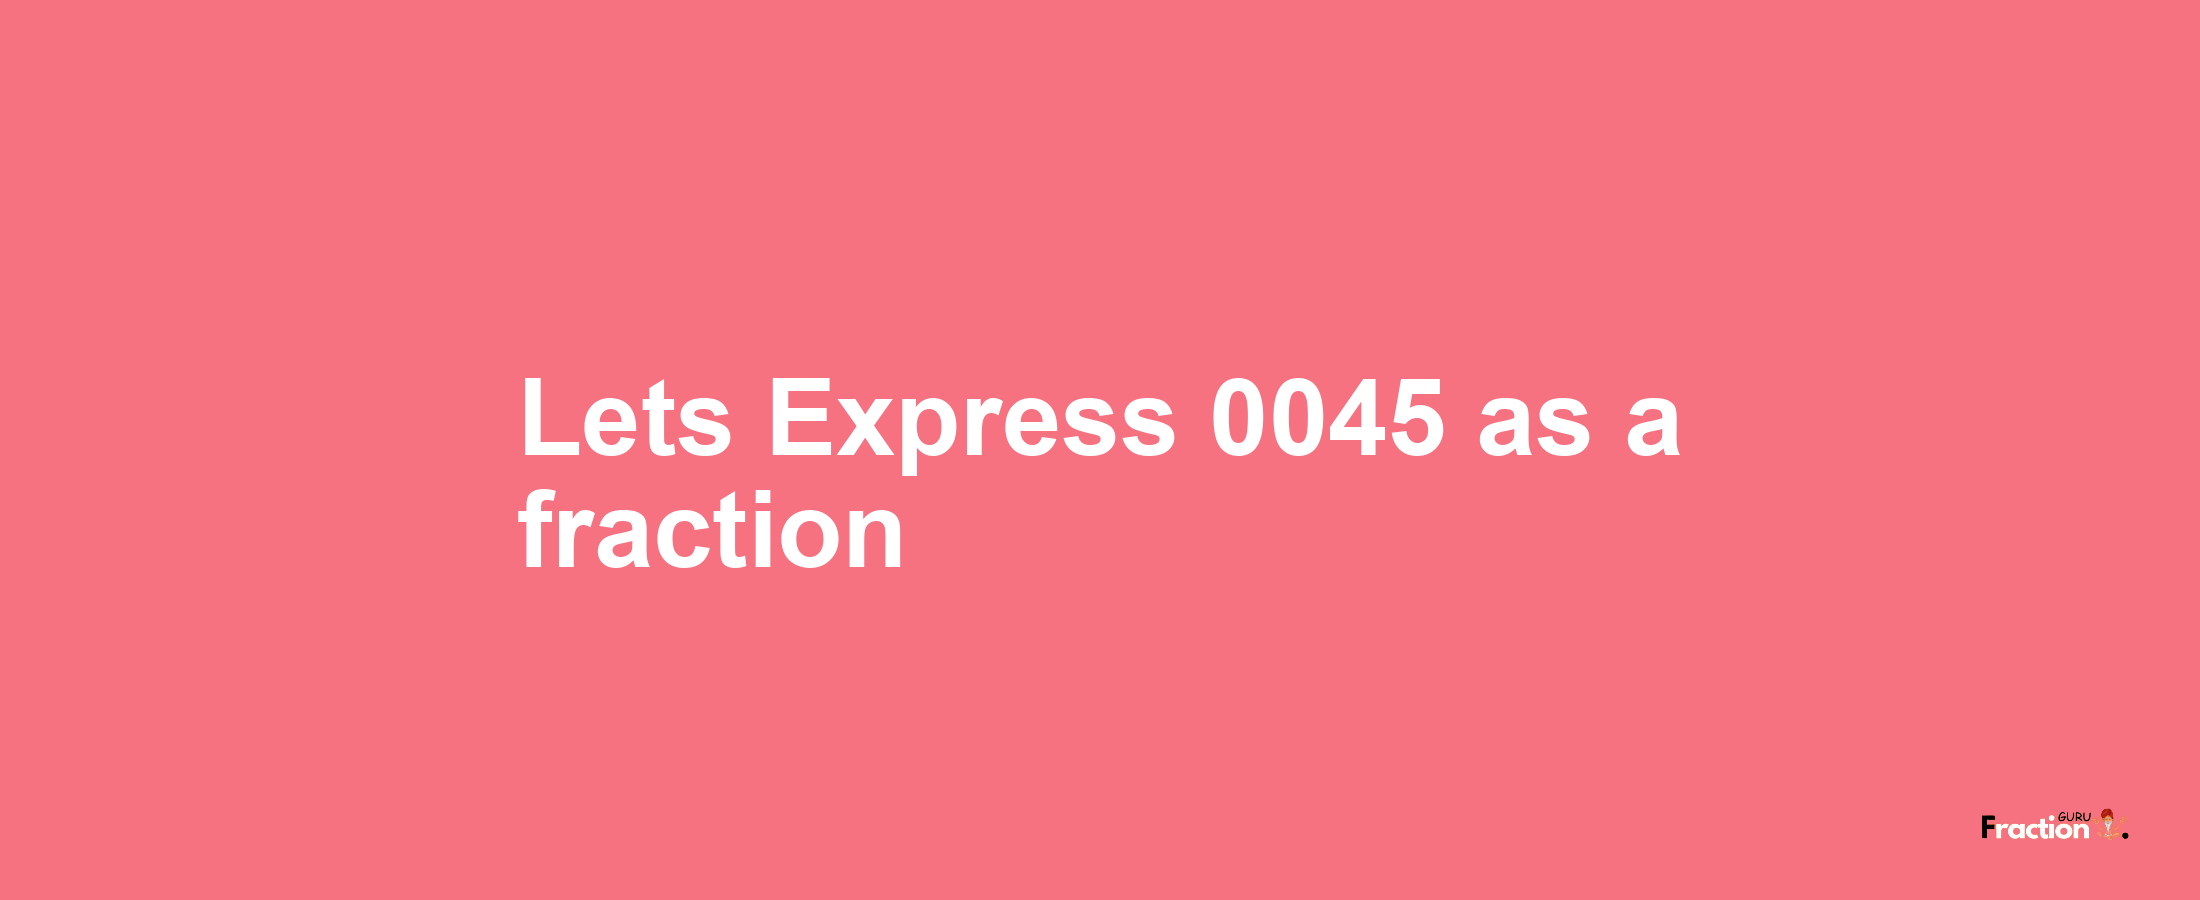 Lets Express 0045 as afraction